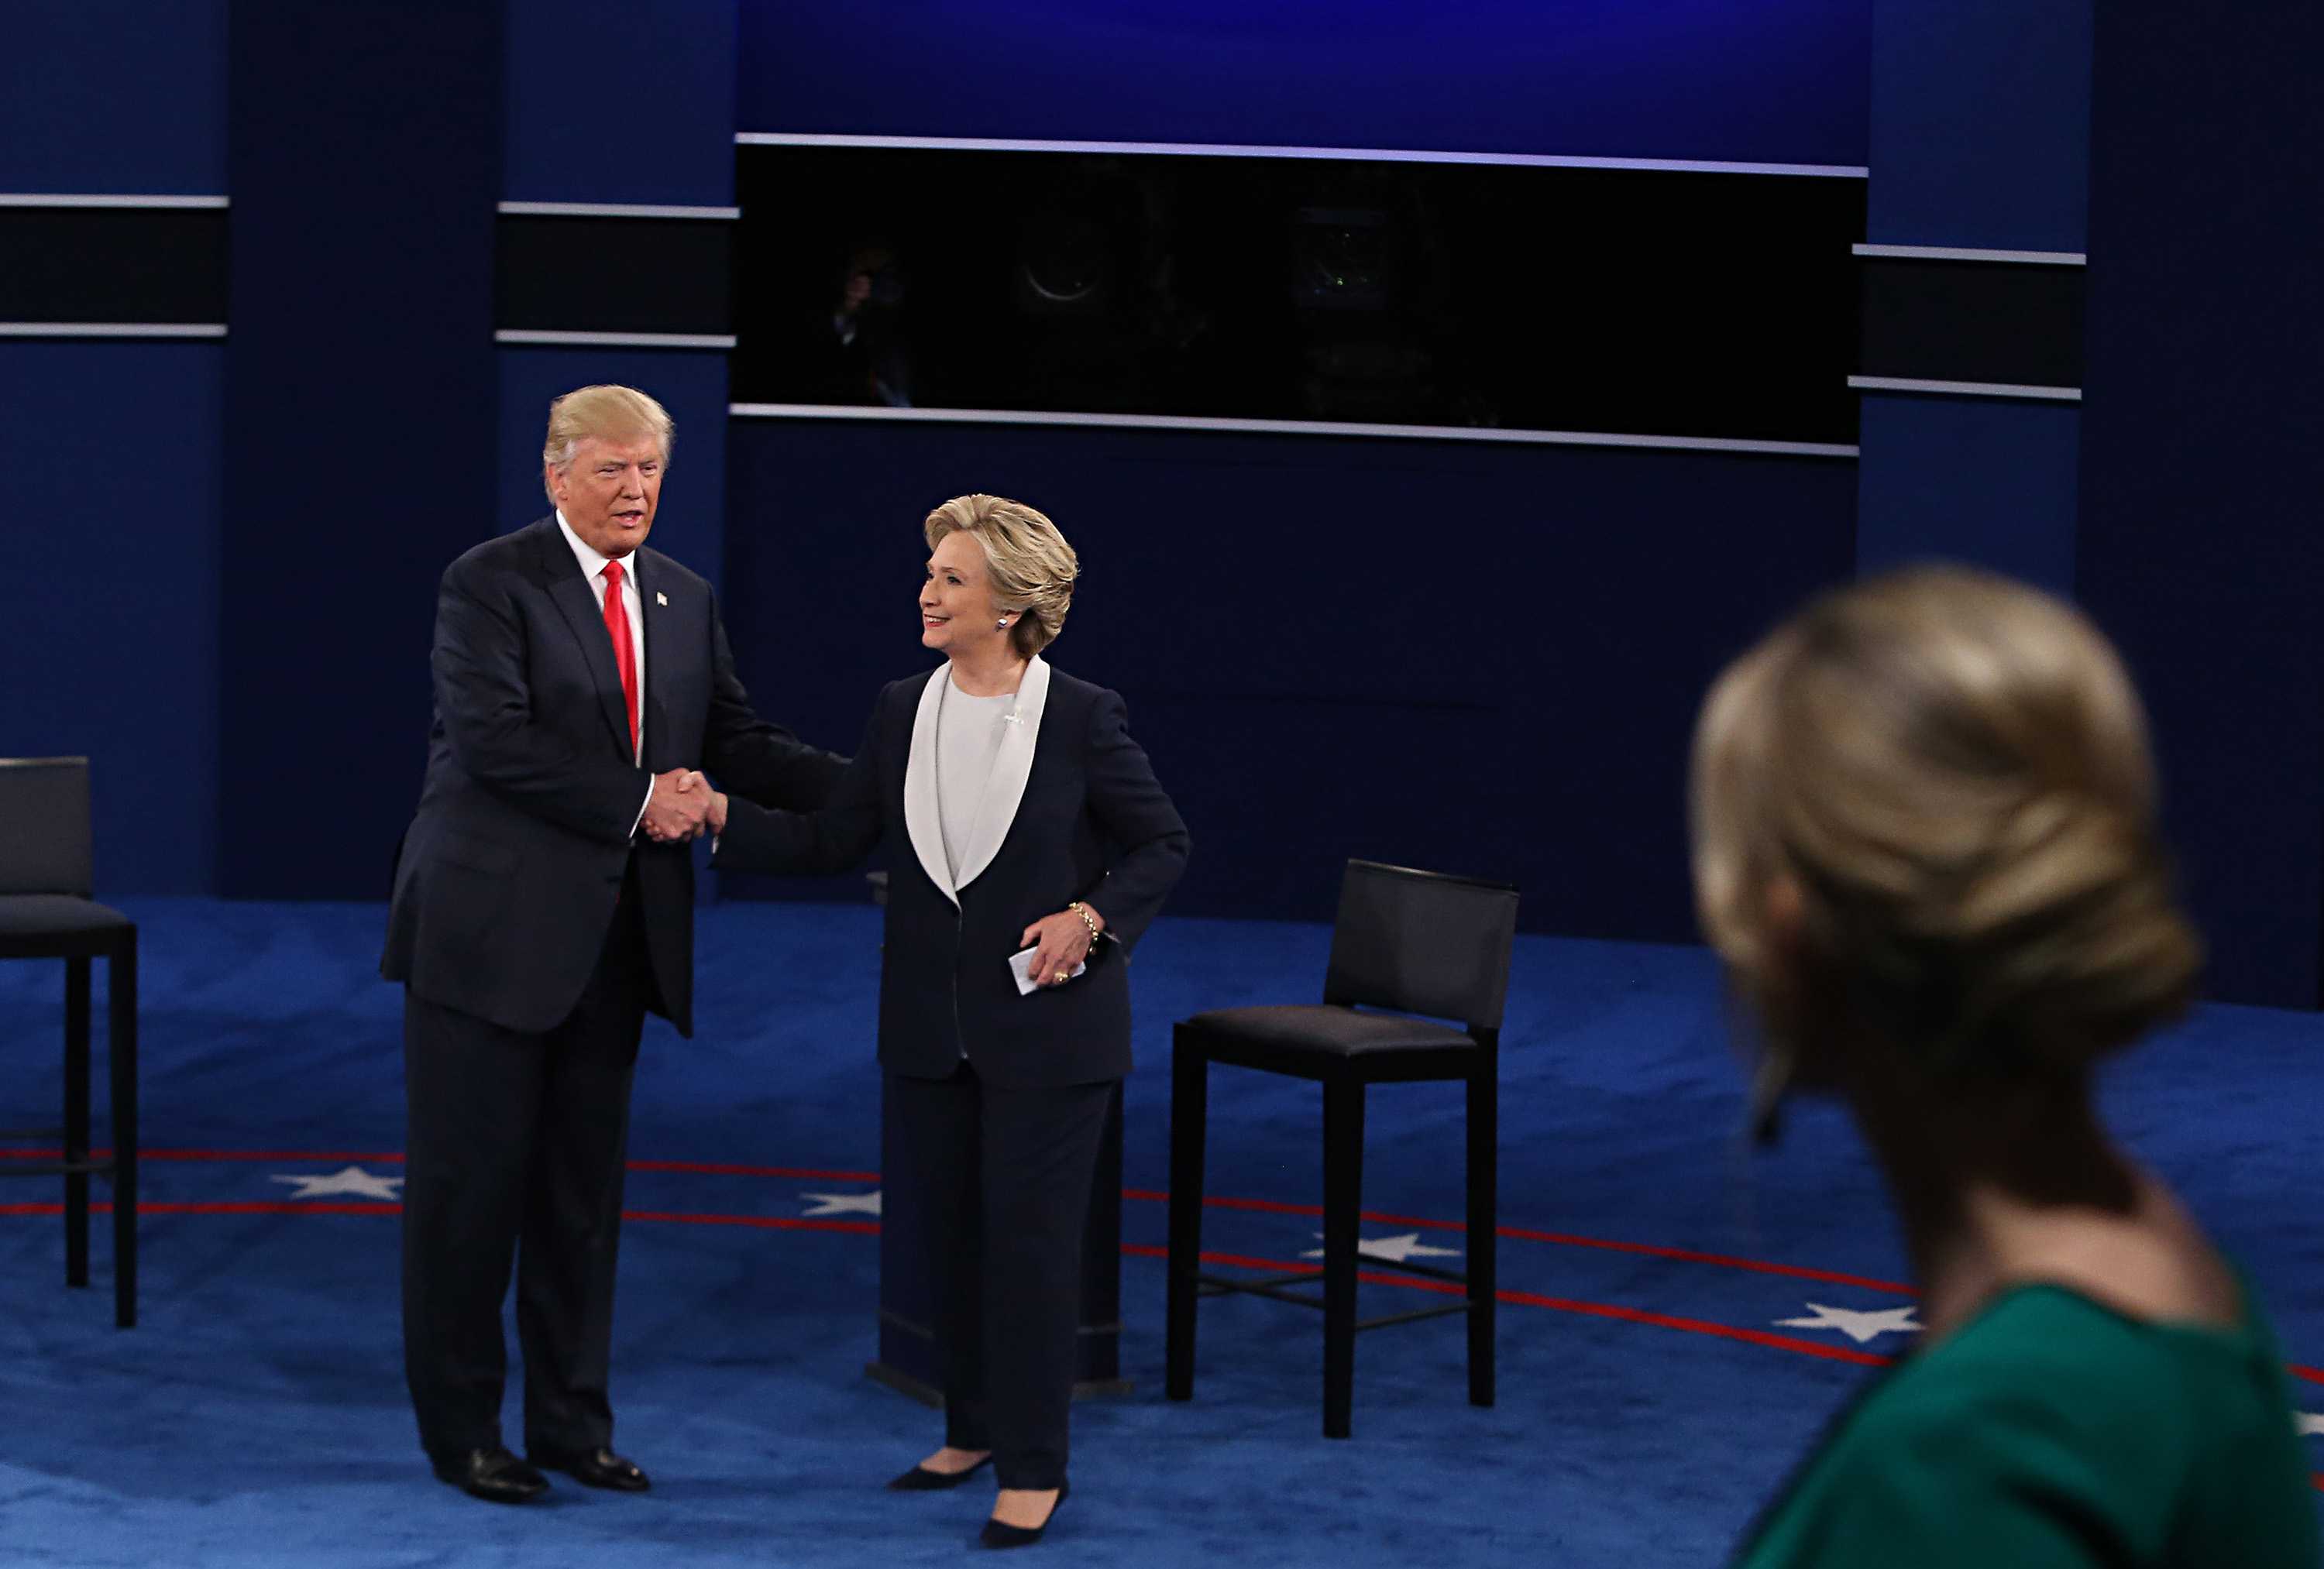 Trump and Clinton shake hands after debate